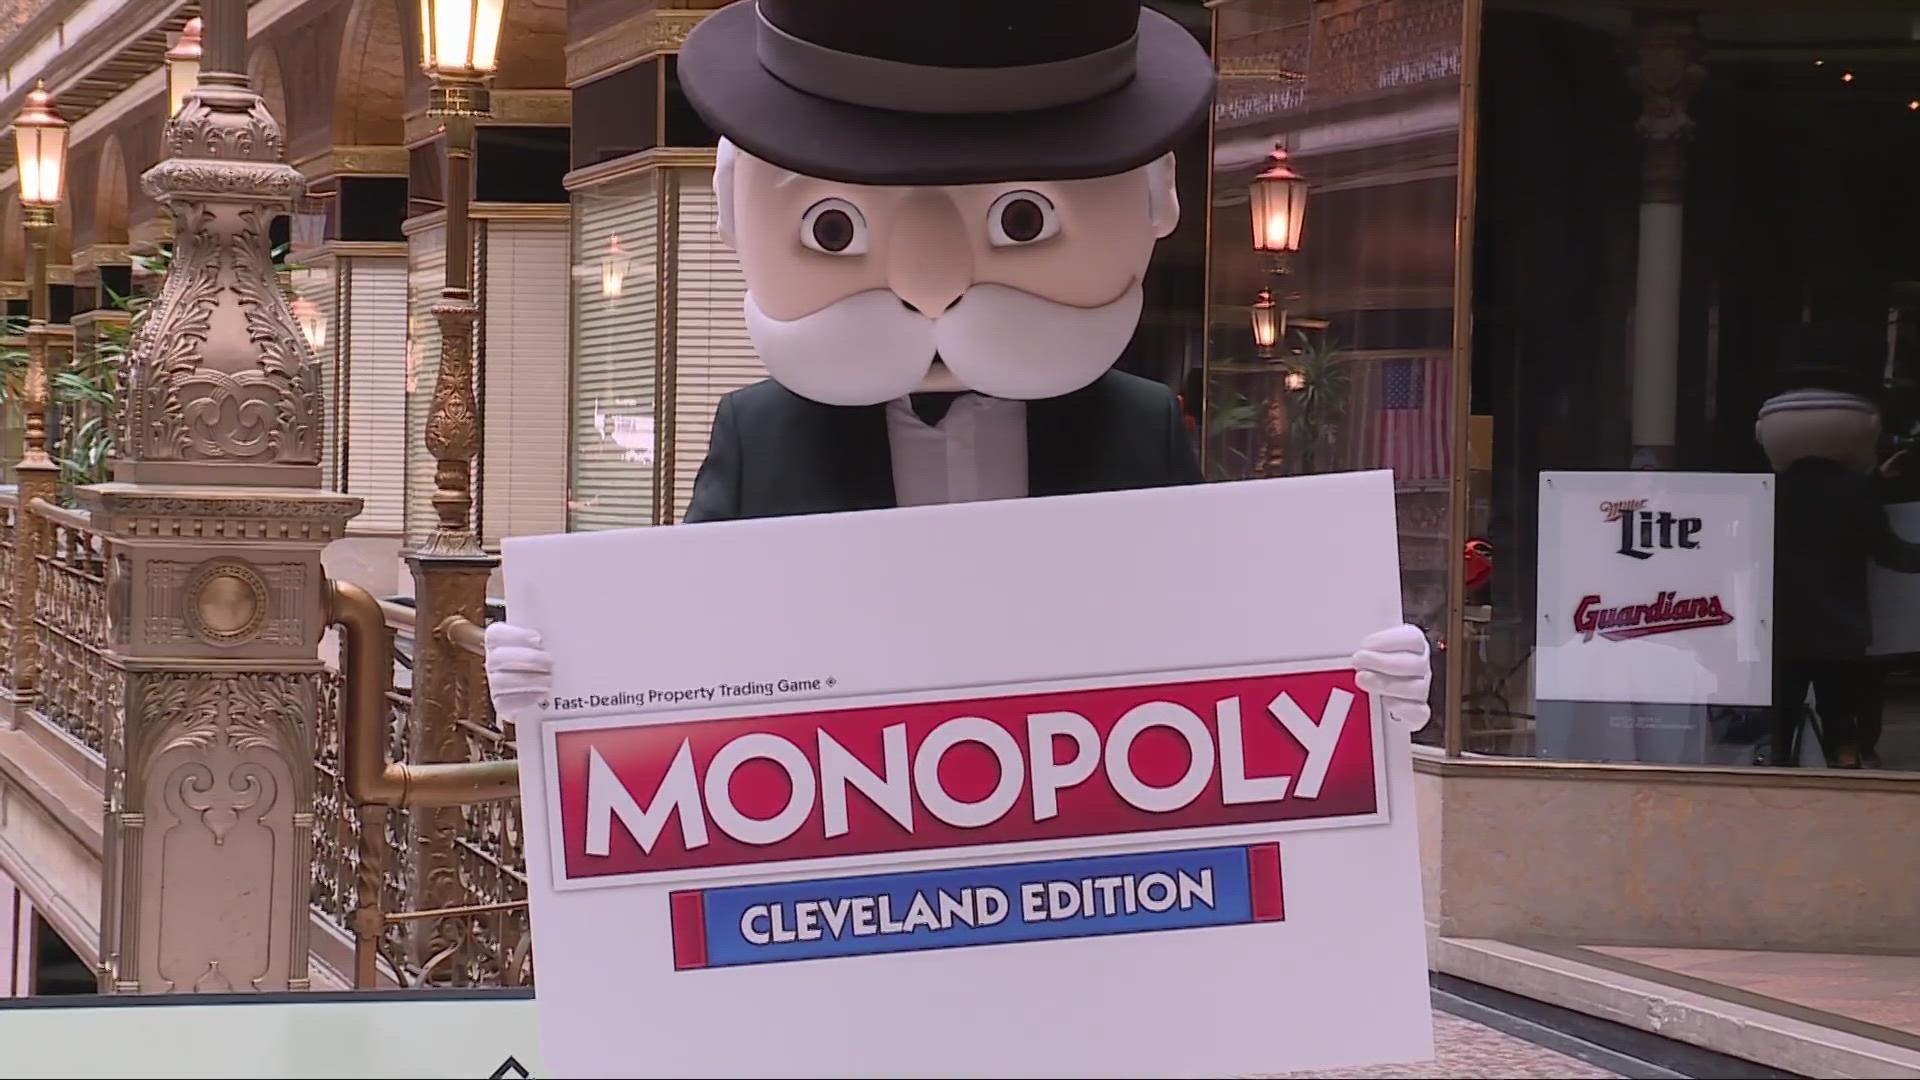 The game is expected to be on store shelves this October, but officials are asking for your help in choosing which Cleveland landmarks are included on the board.